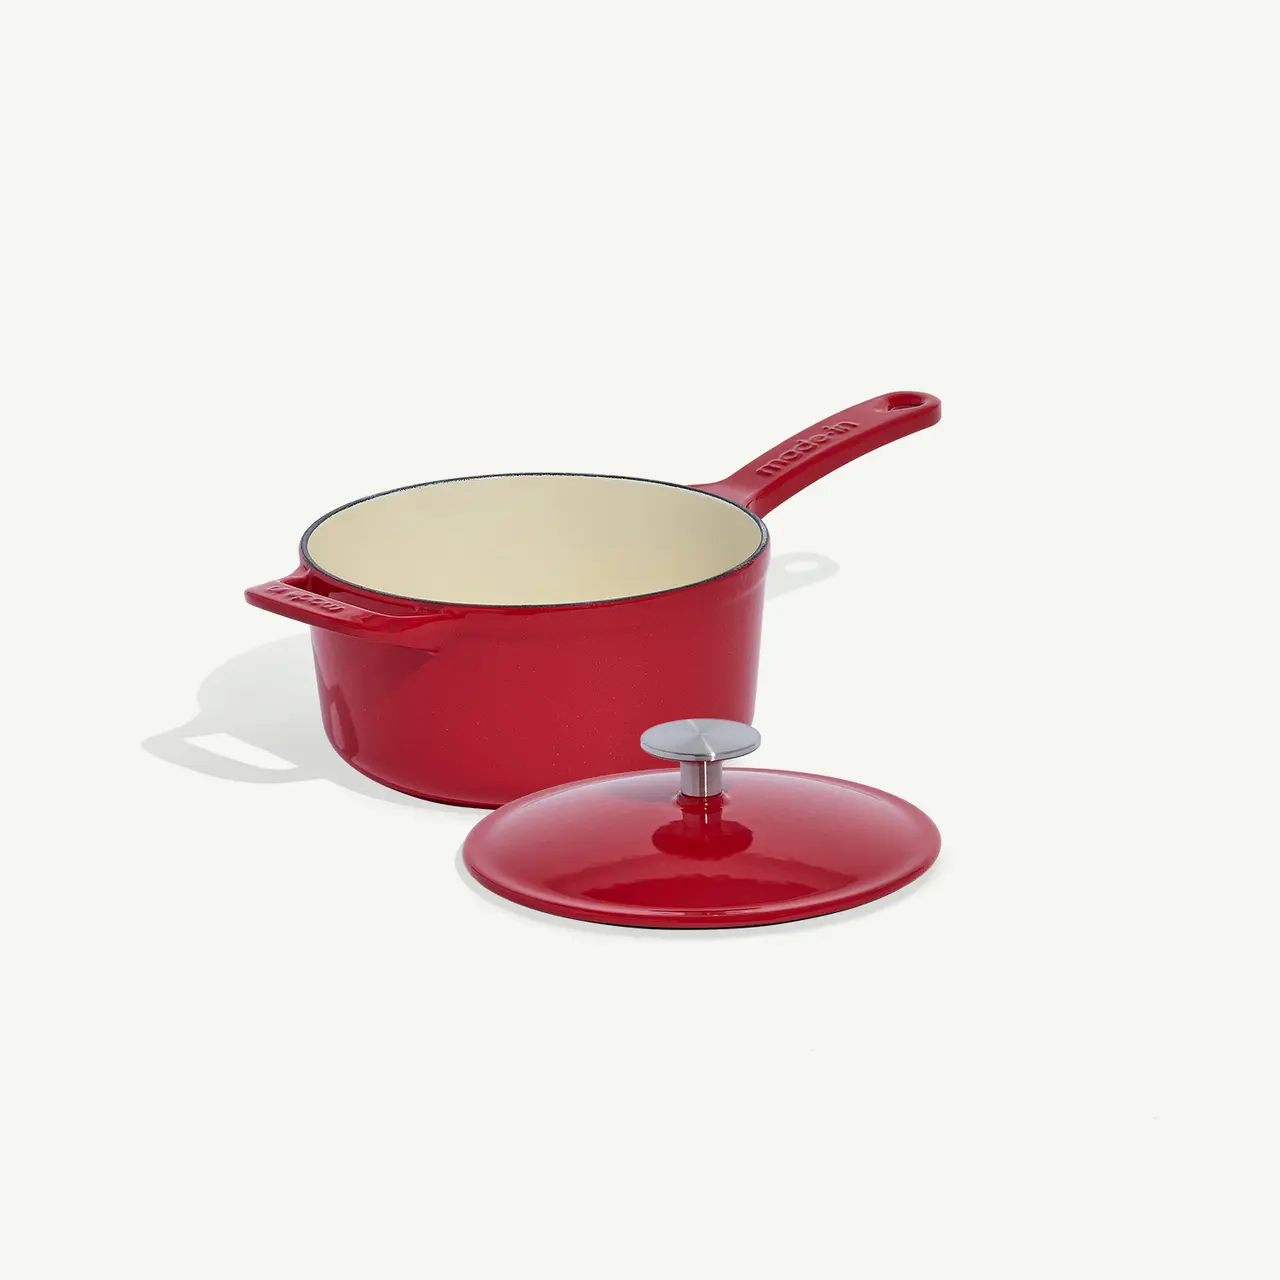 A red saucepan with its lid off is placed on a white background.